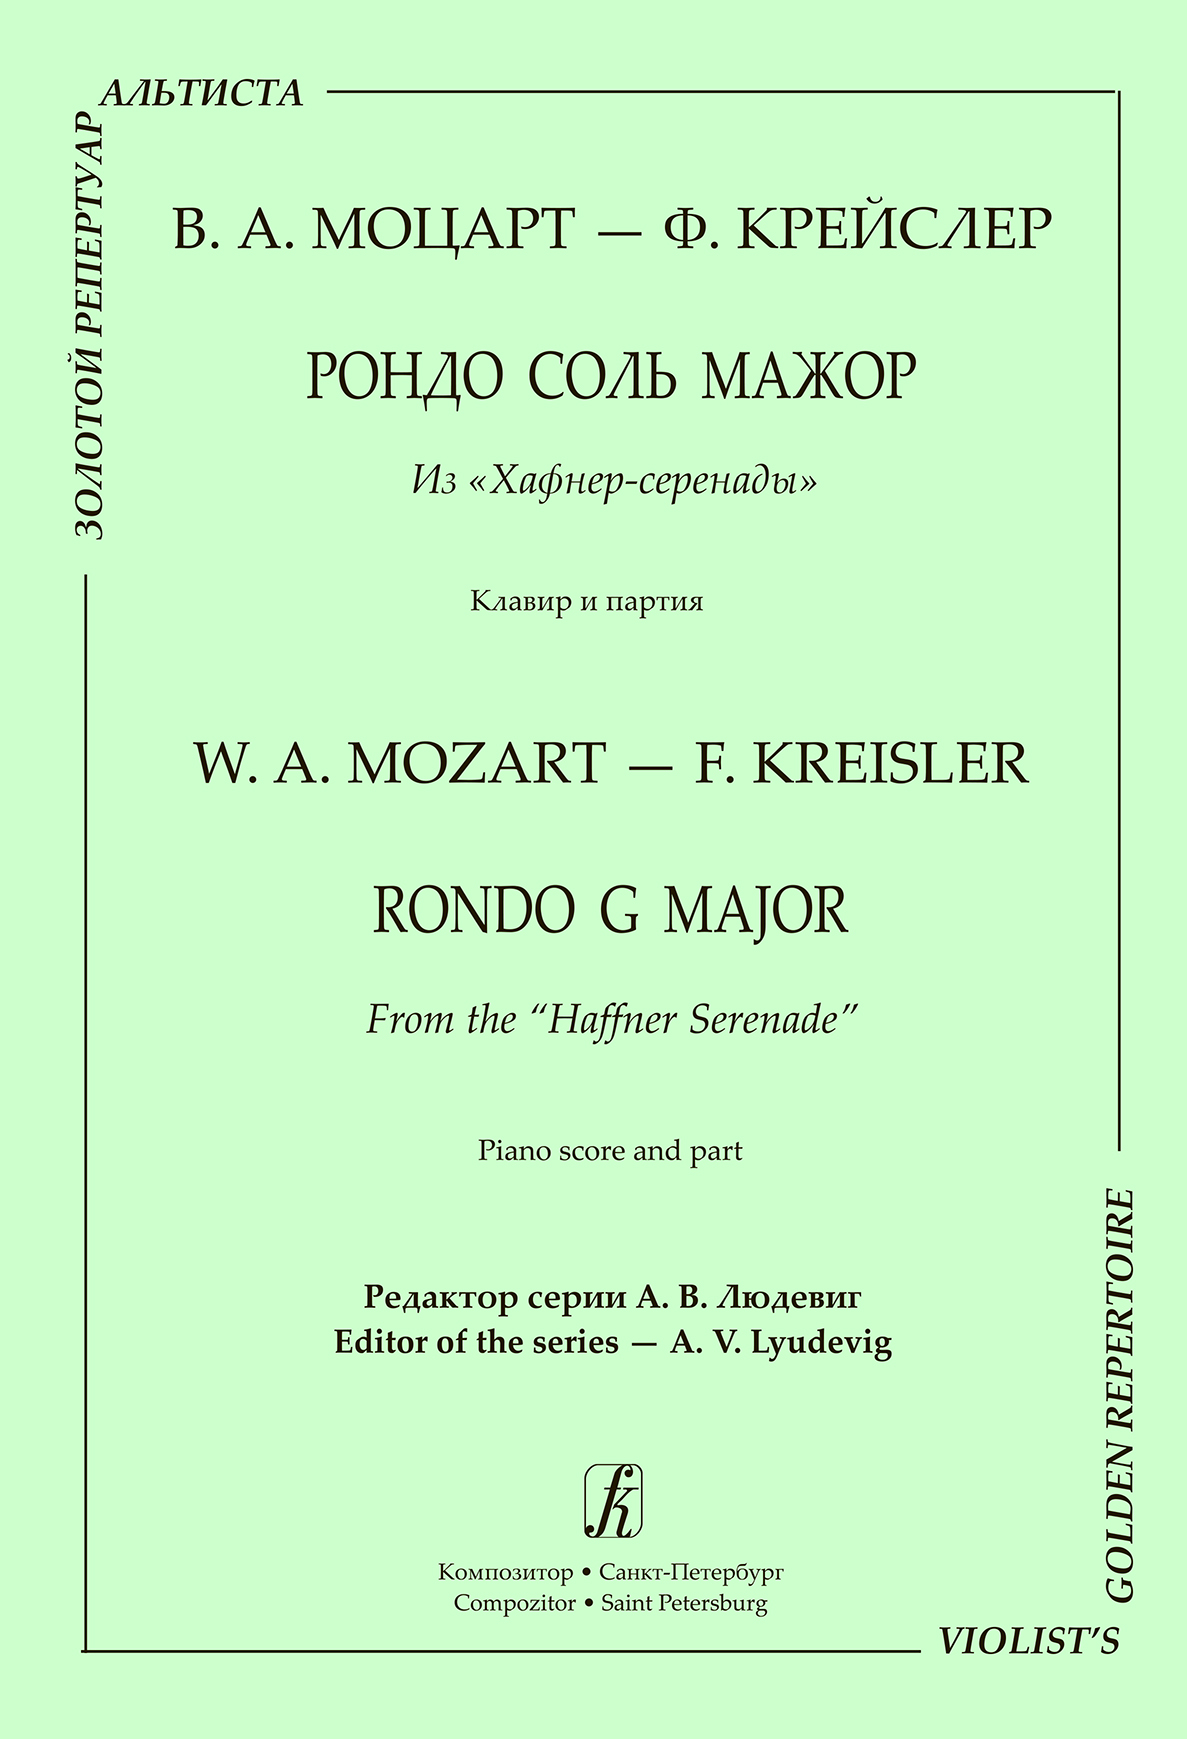 Mozart W. A. Rondo G major from the “Haffner Serenade”. Piano score and part